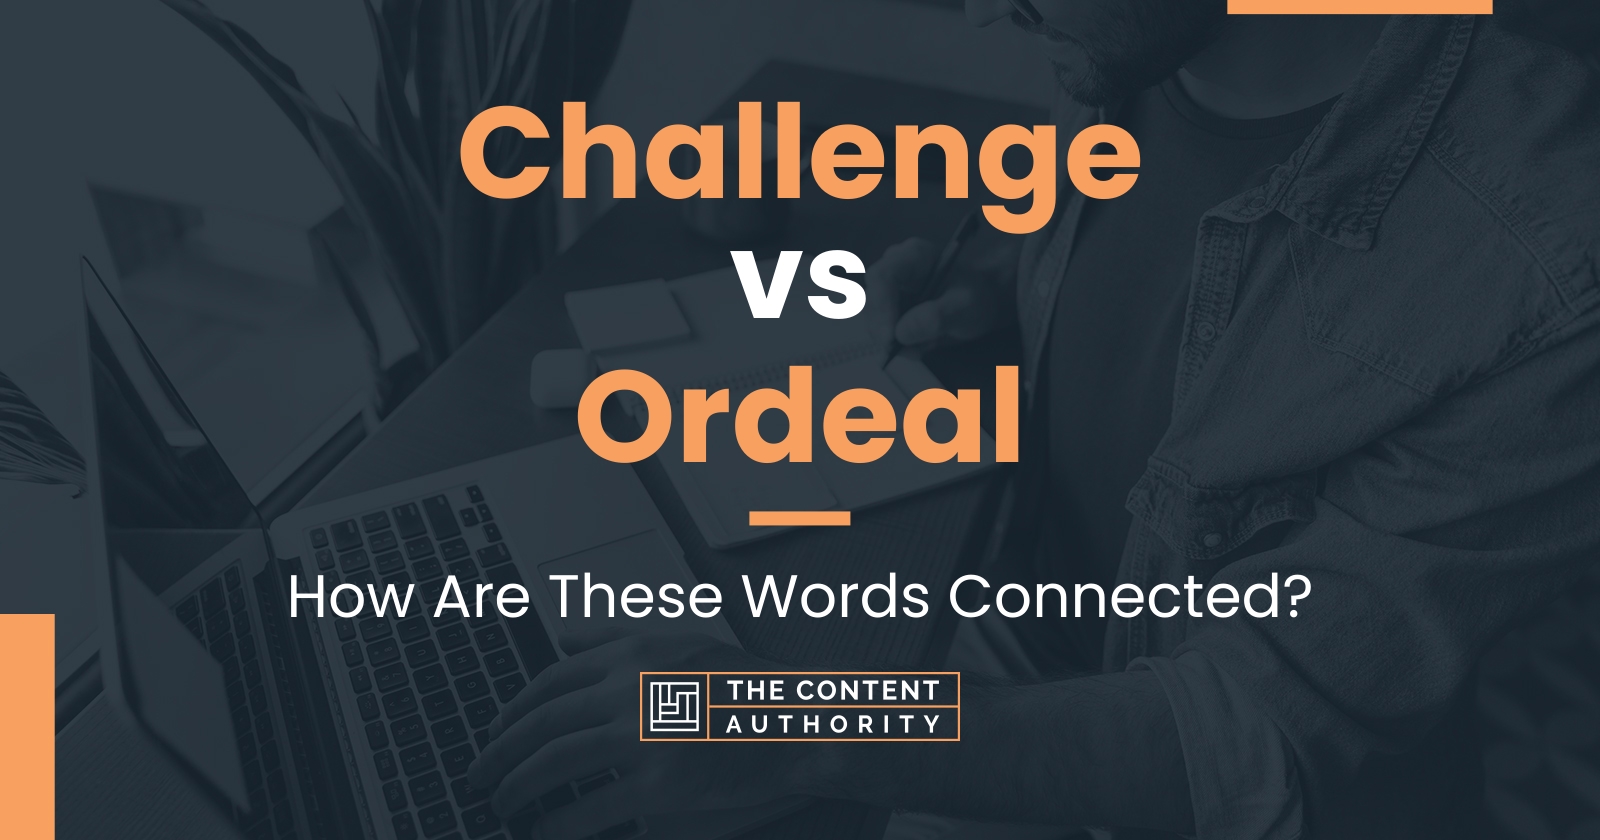 Challenge vs Ordeal: How Are These Words Connected?